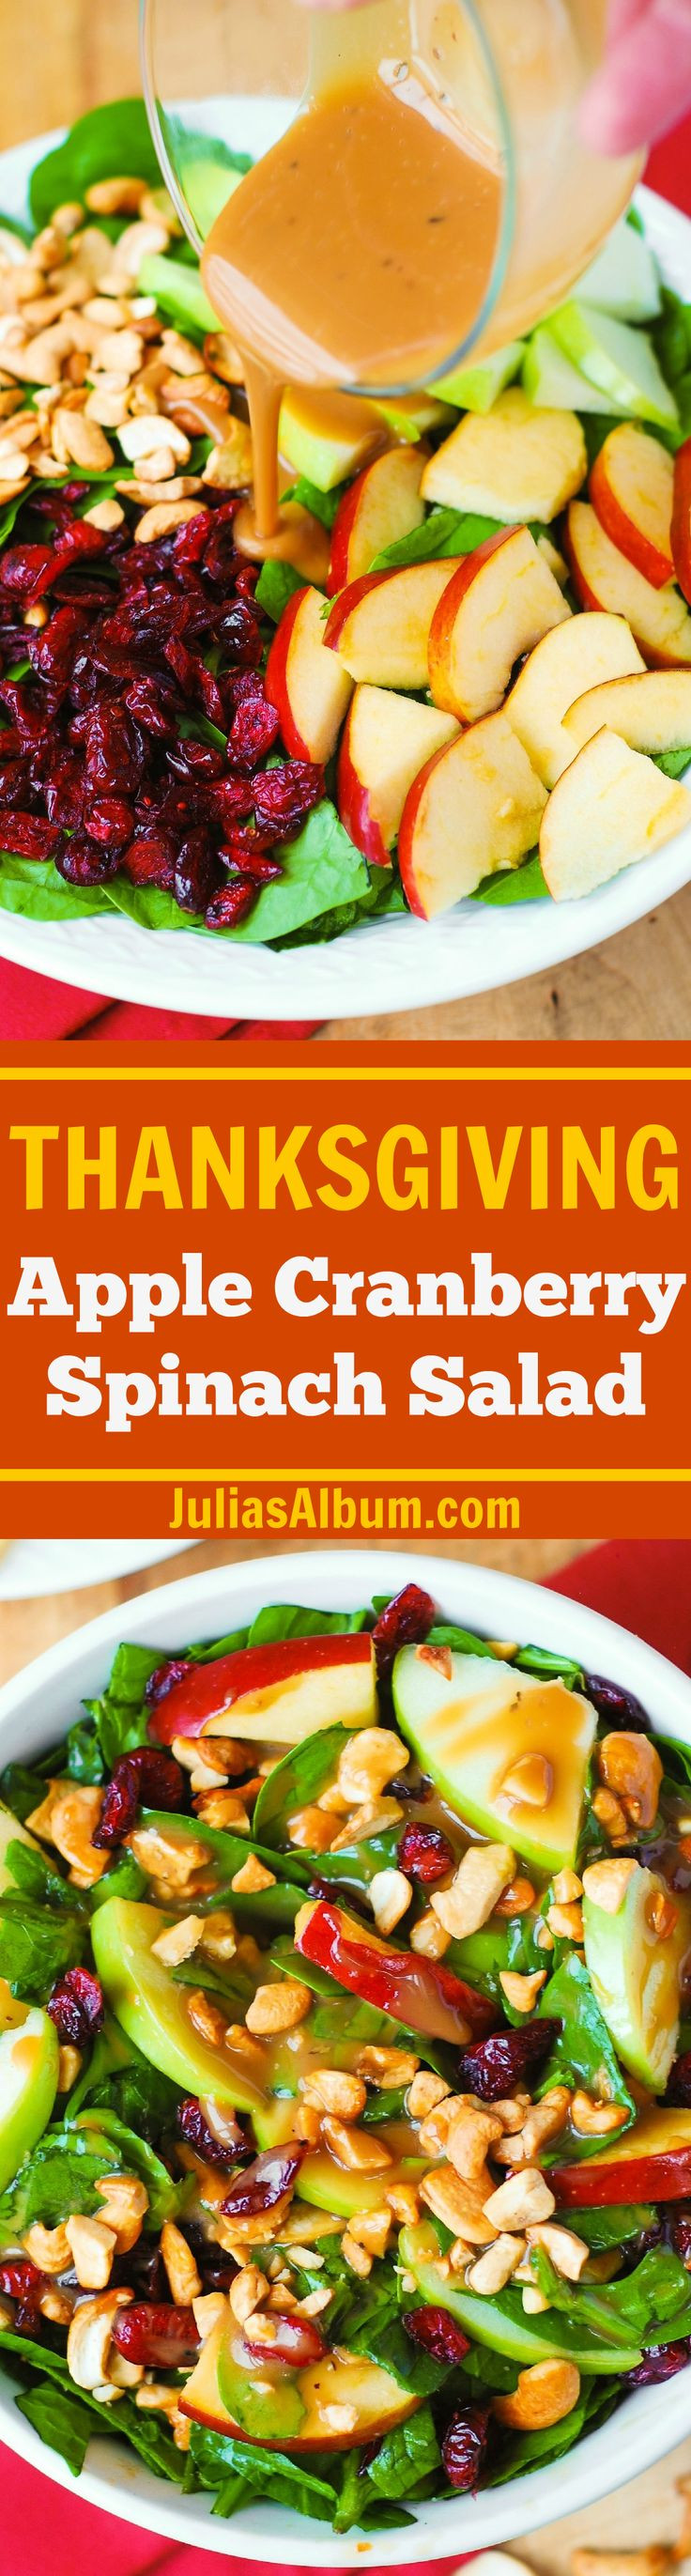 Thanksgiving Side Salads
 17 Best ideas about Thanksgiving Salad on Pinterest